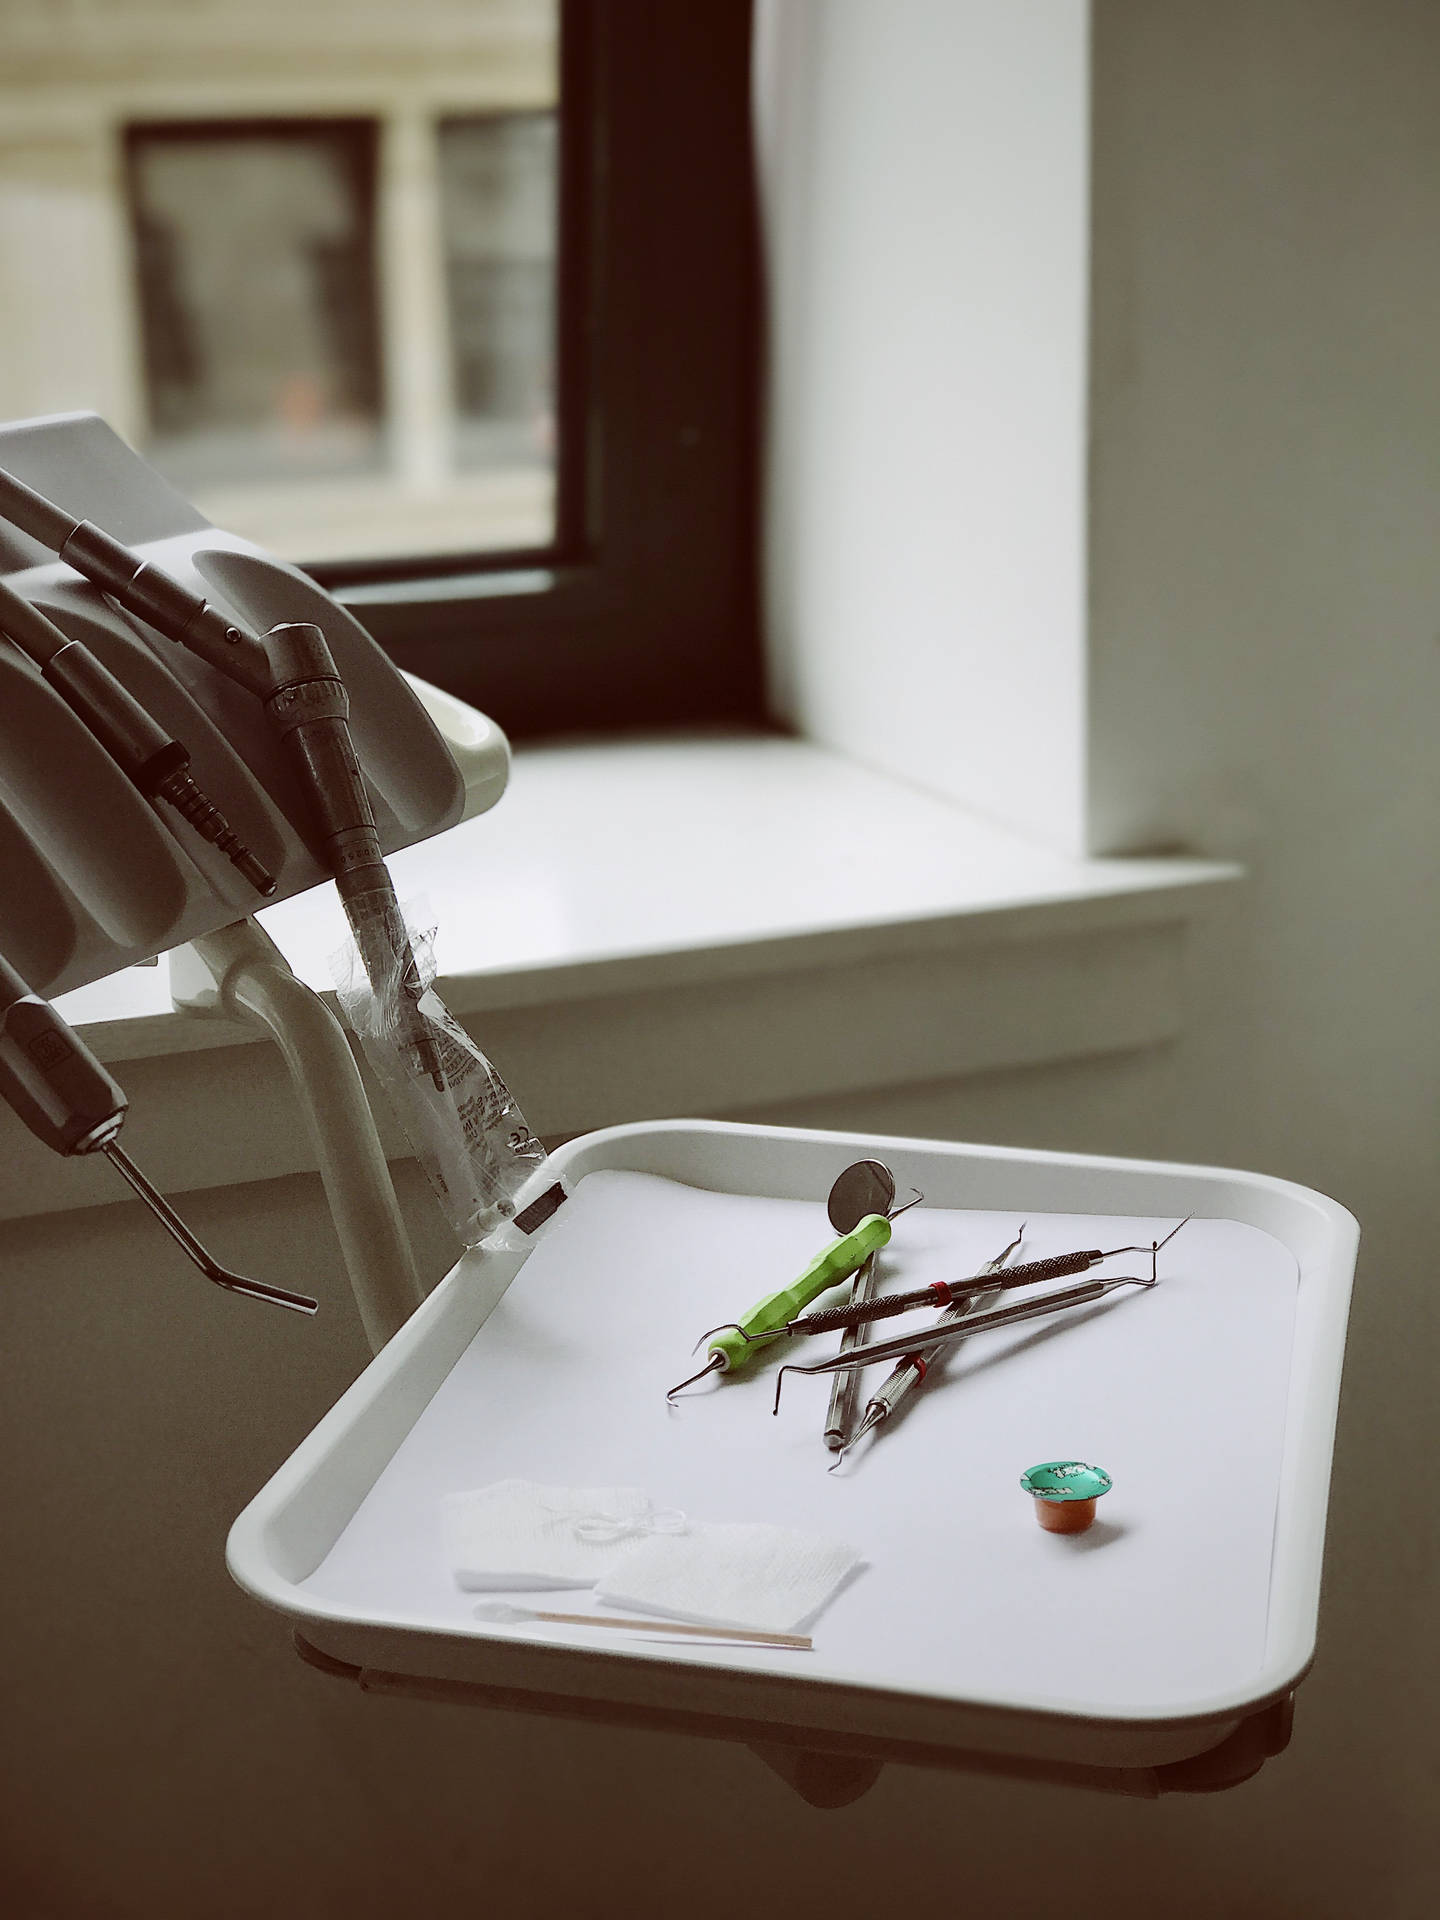 Dentistry Tools By A Window